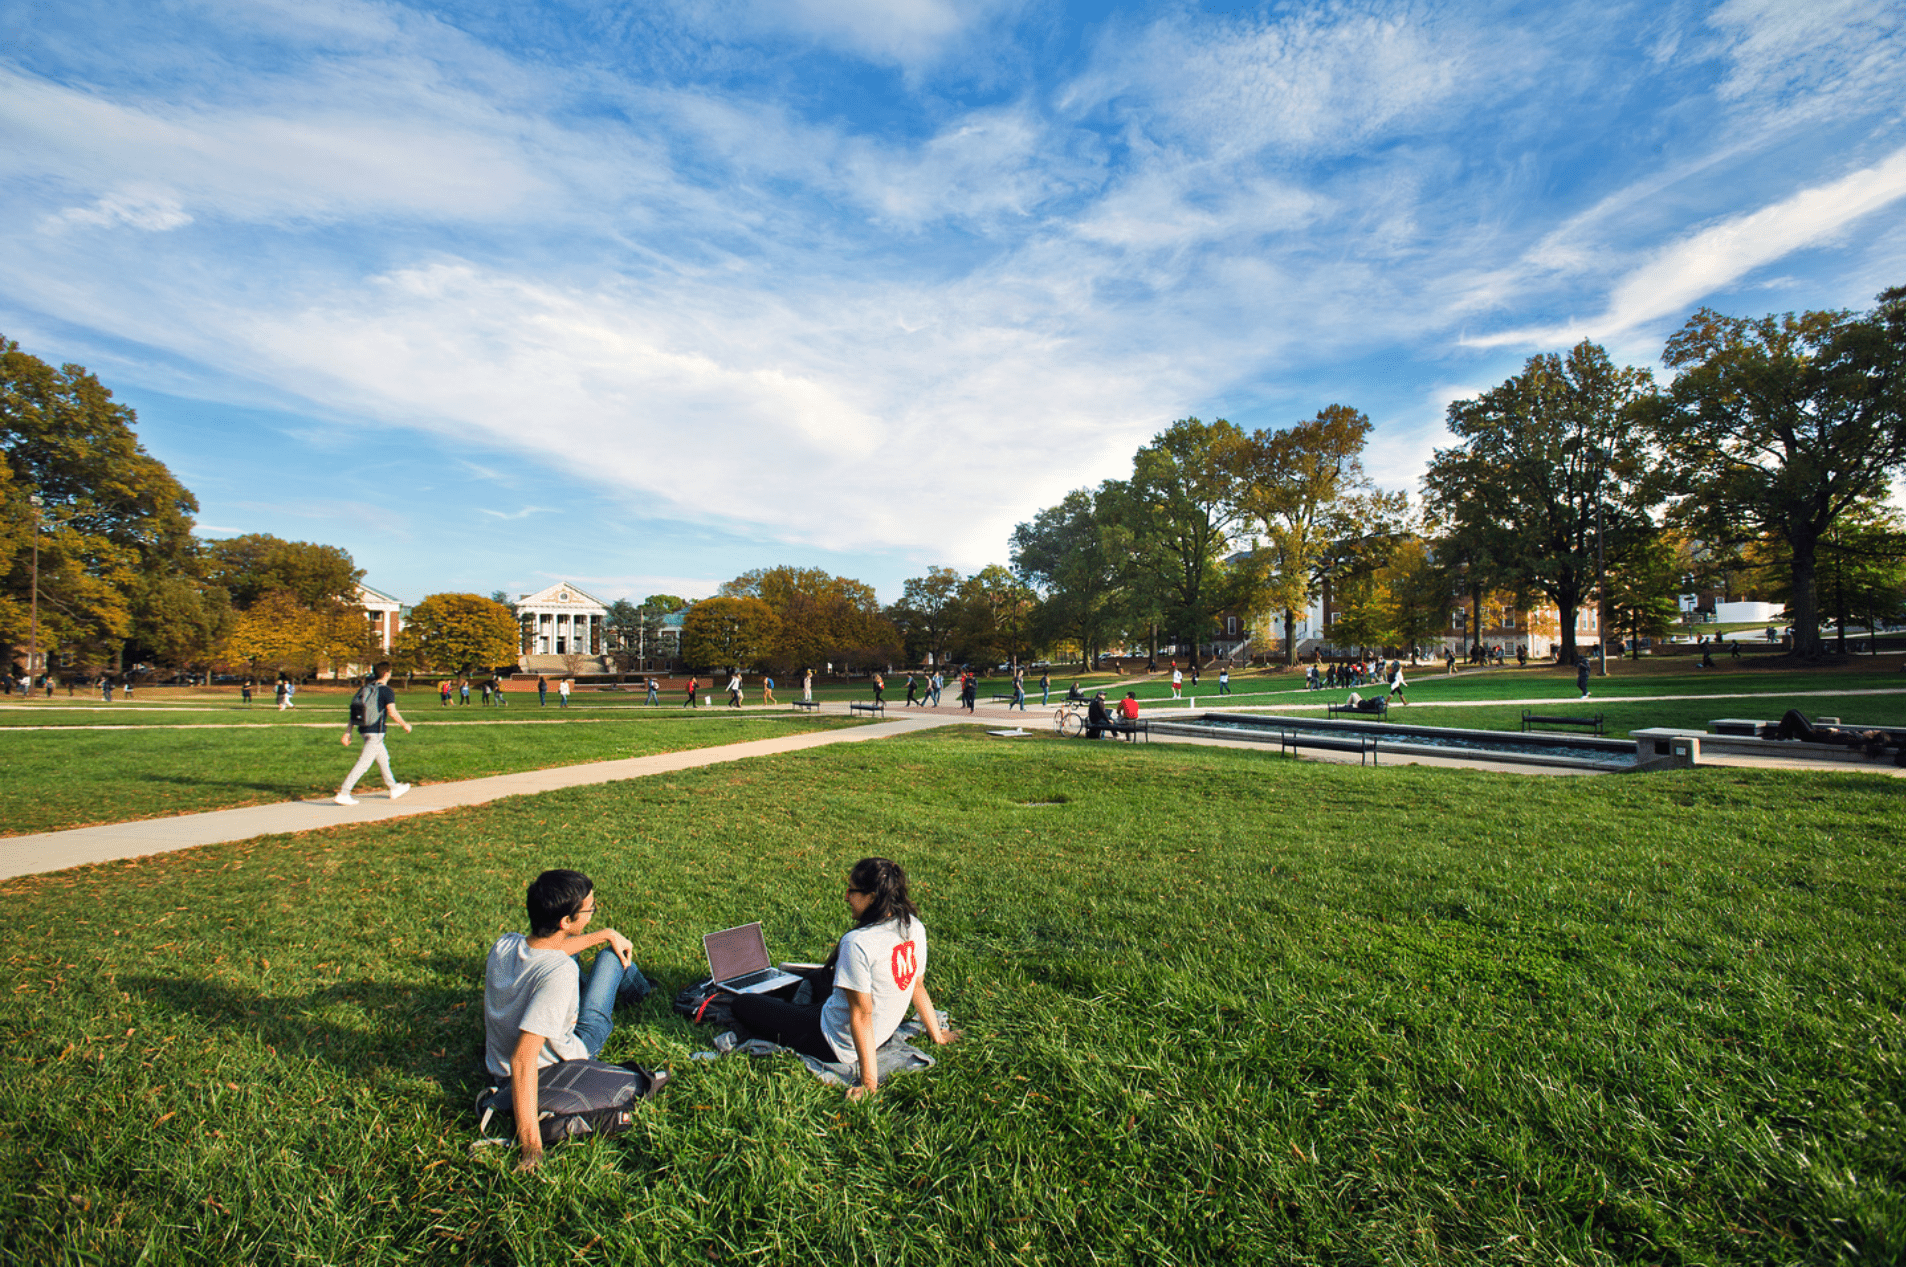 University of Maryland, students in conversation on the quad